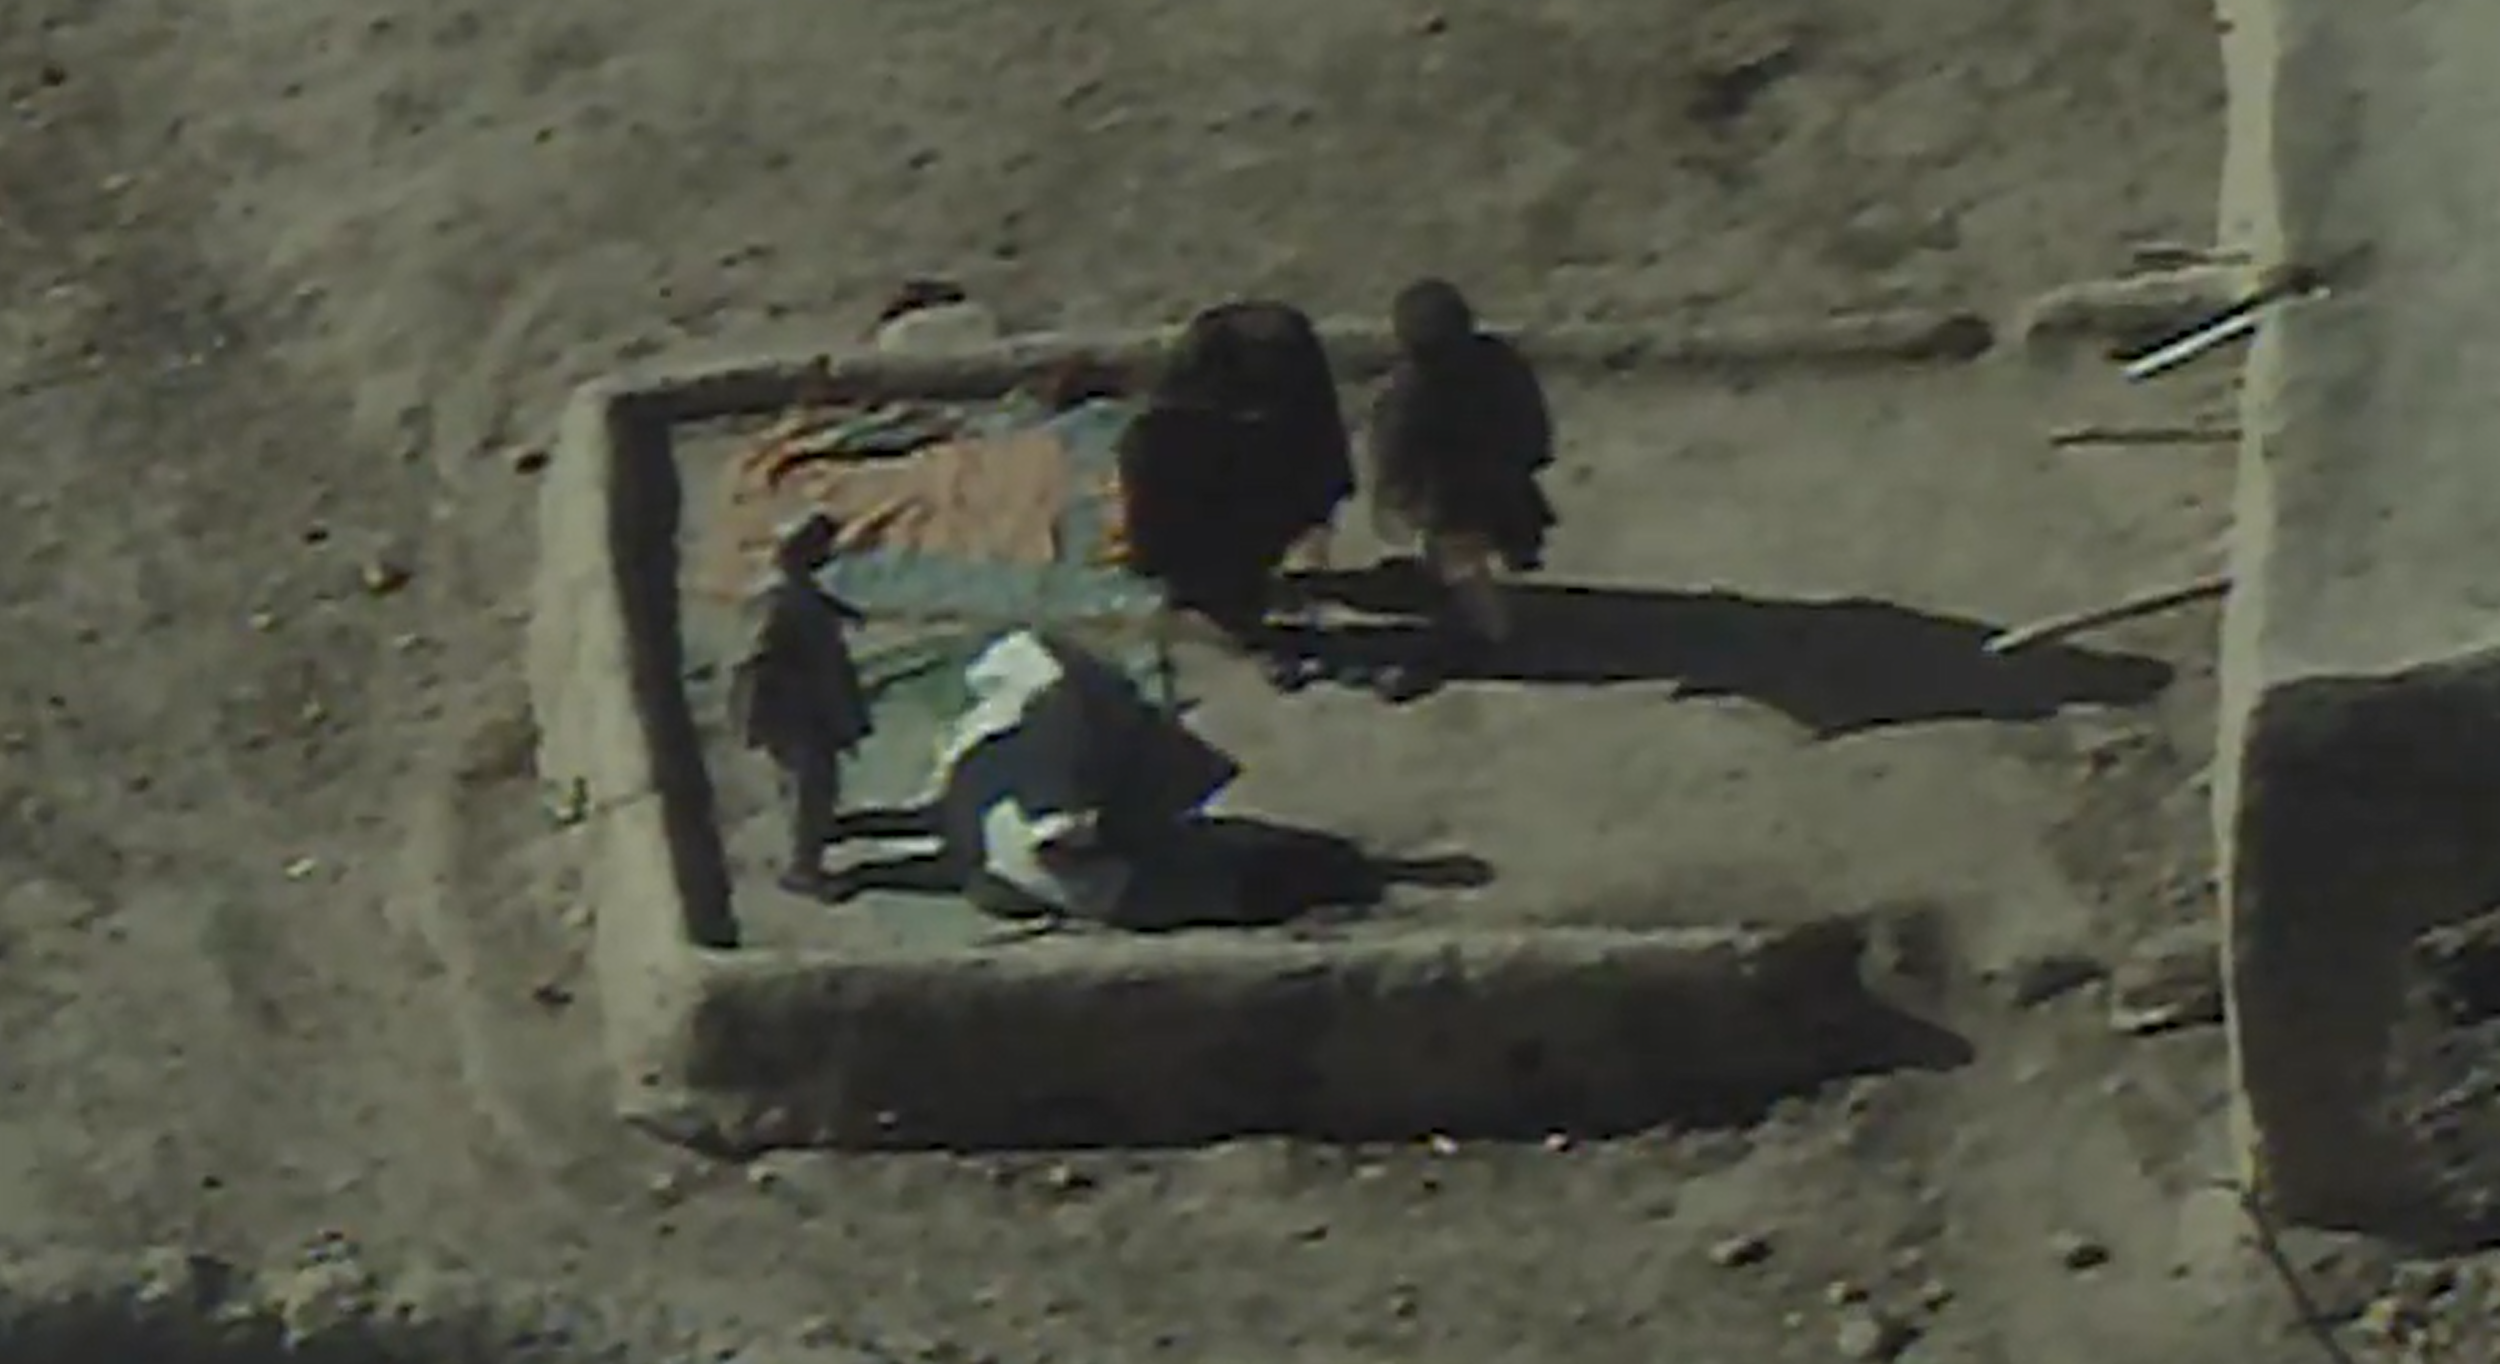 PICTURED: Drone footage of a group of unarmed people, likely in Helmand Province, Afghanistan, taken before they were killed by drone bomb. PC: Jack Murphy, Connecting Vets.